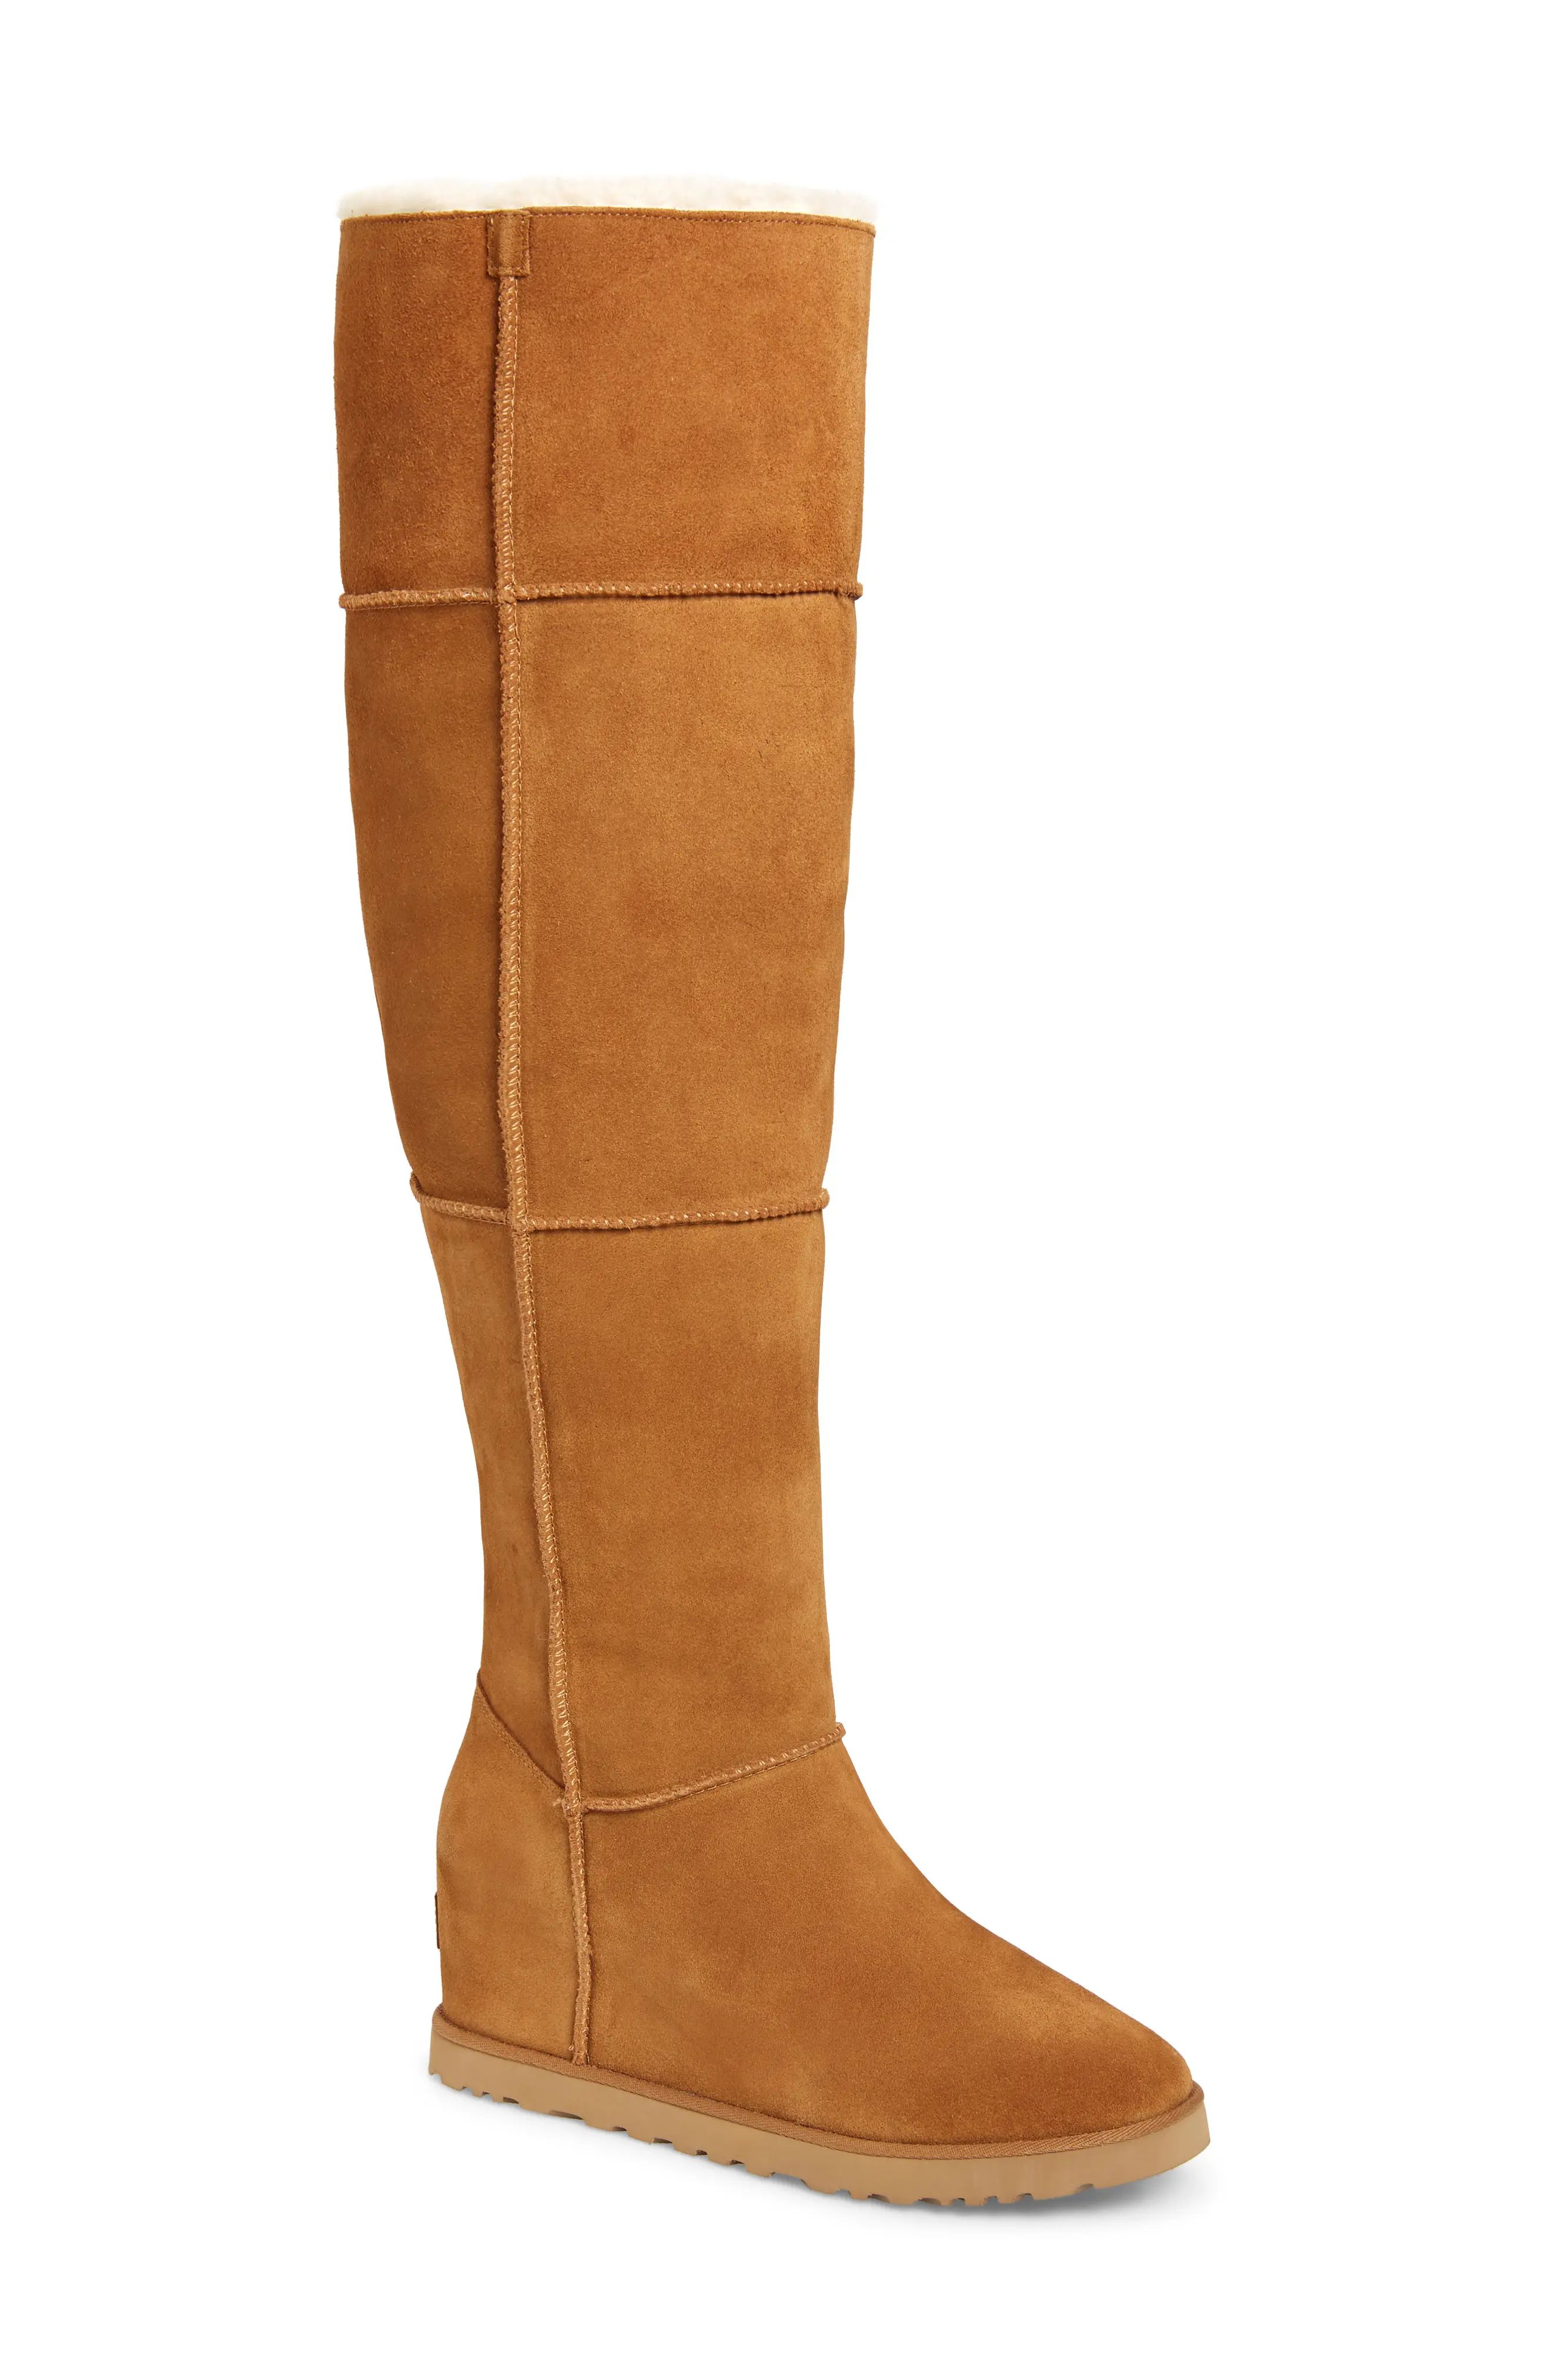 Women's UGG Classic Femme Over The Knee Wedge Boot, Size 6 M - Brown | Nordstrom